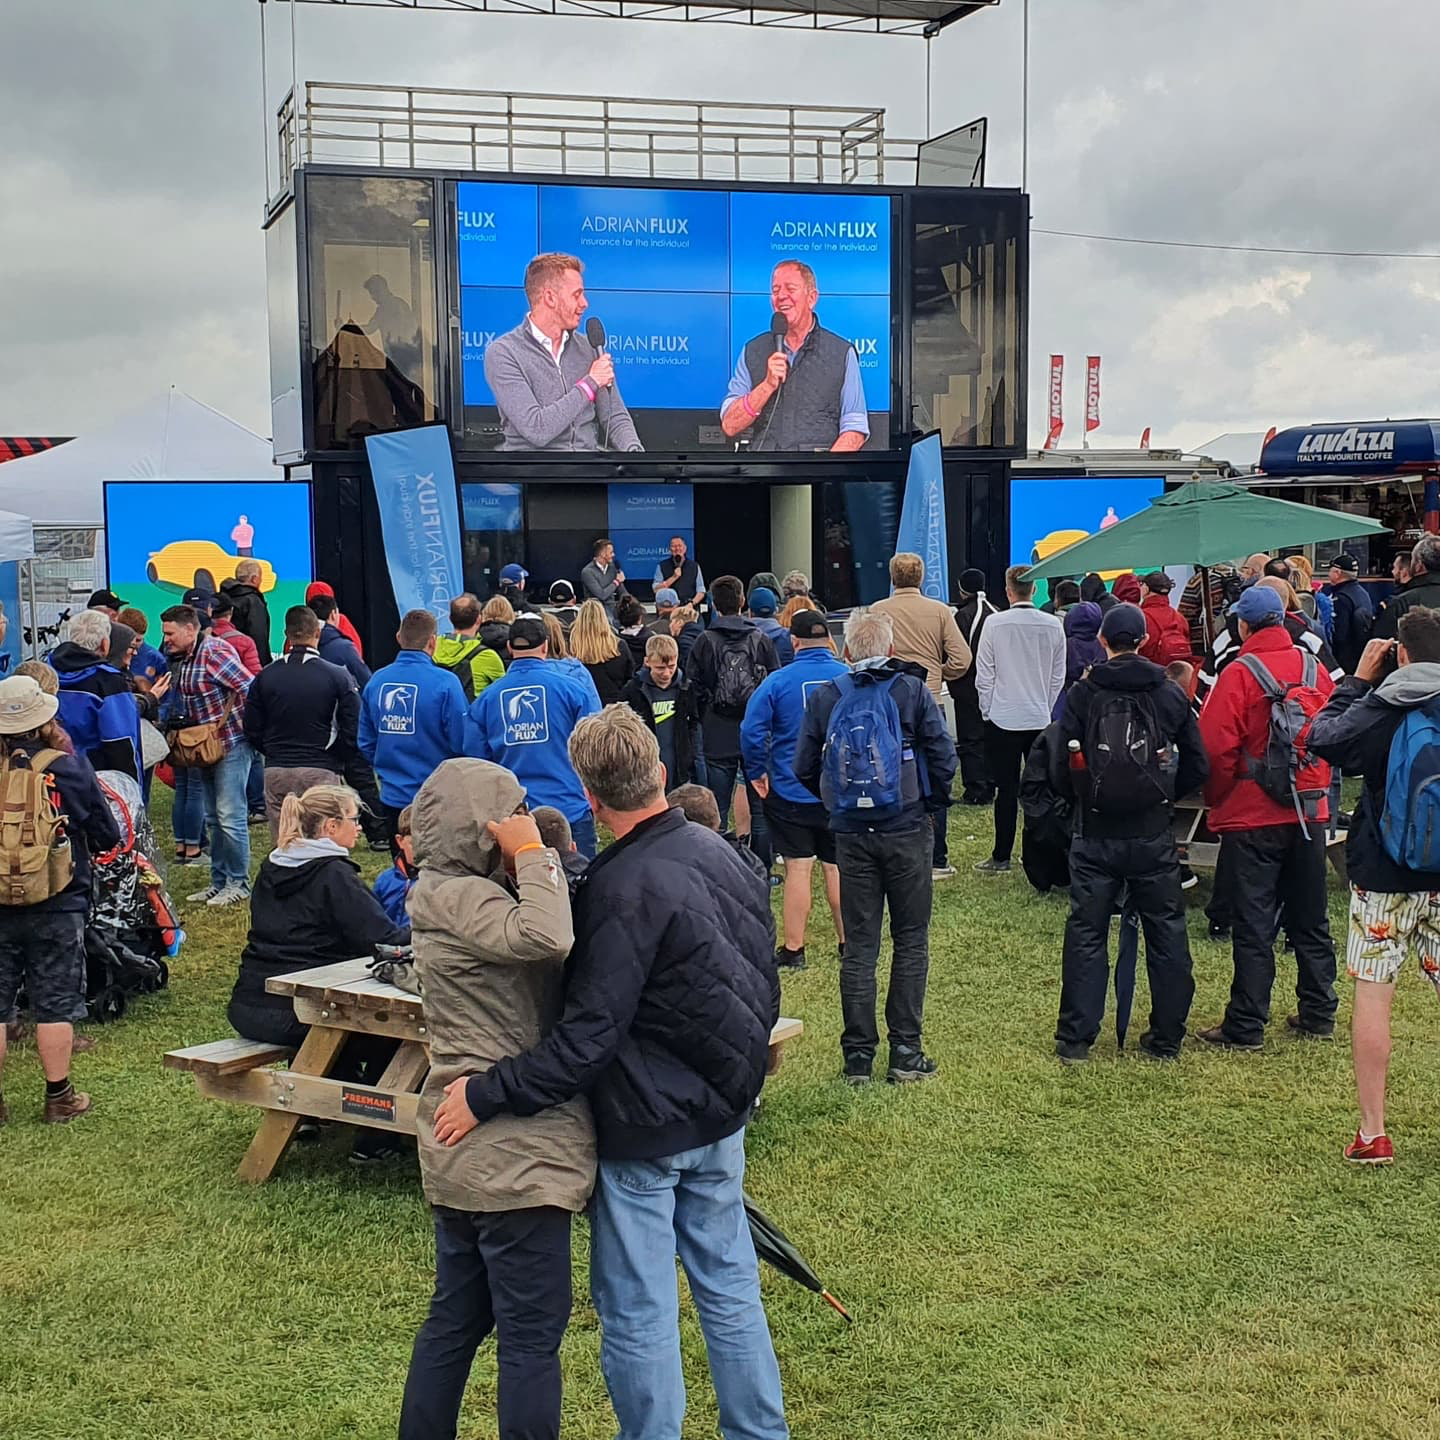 Crowds braved the rain to watch Alex and Martin Brundle at Silverstone.